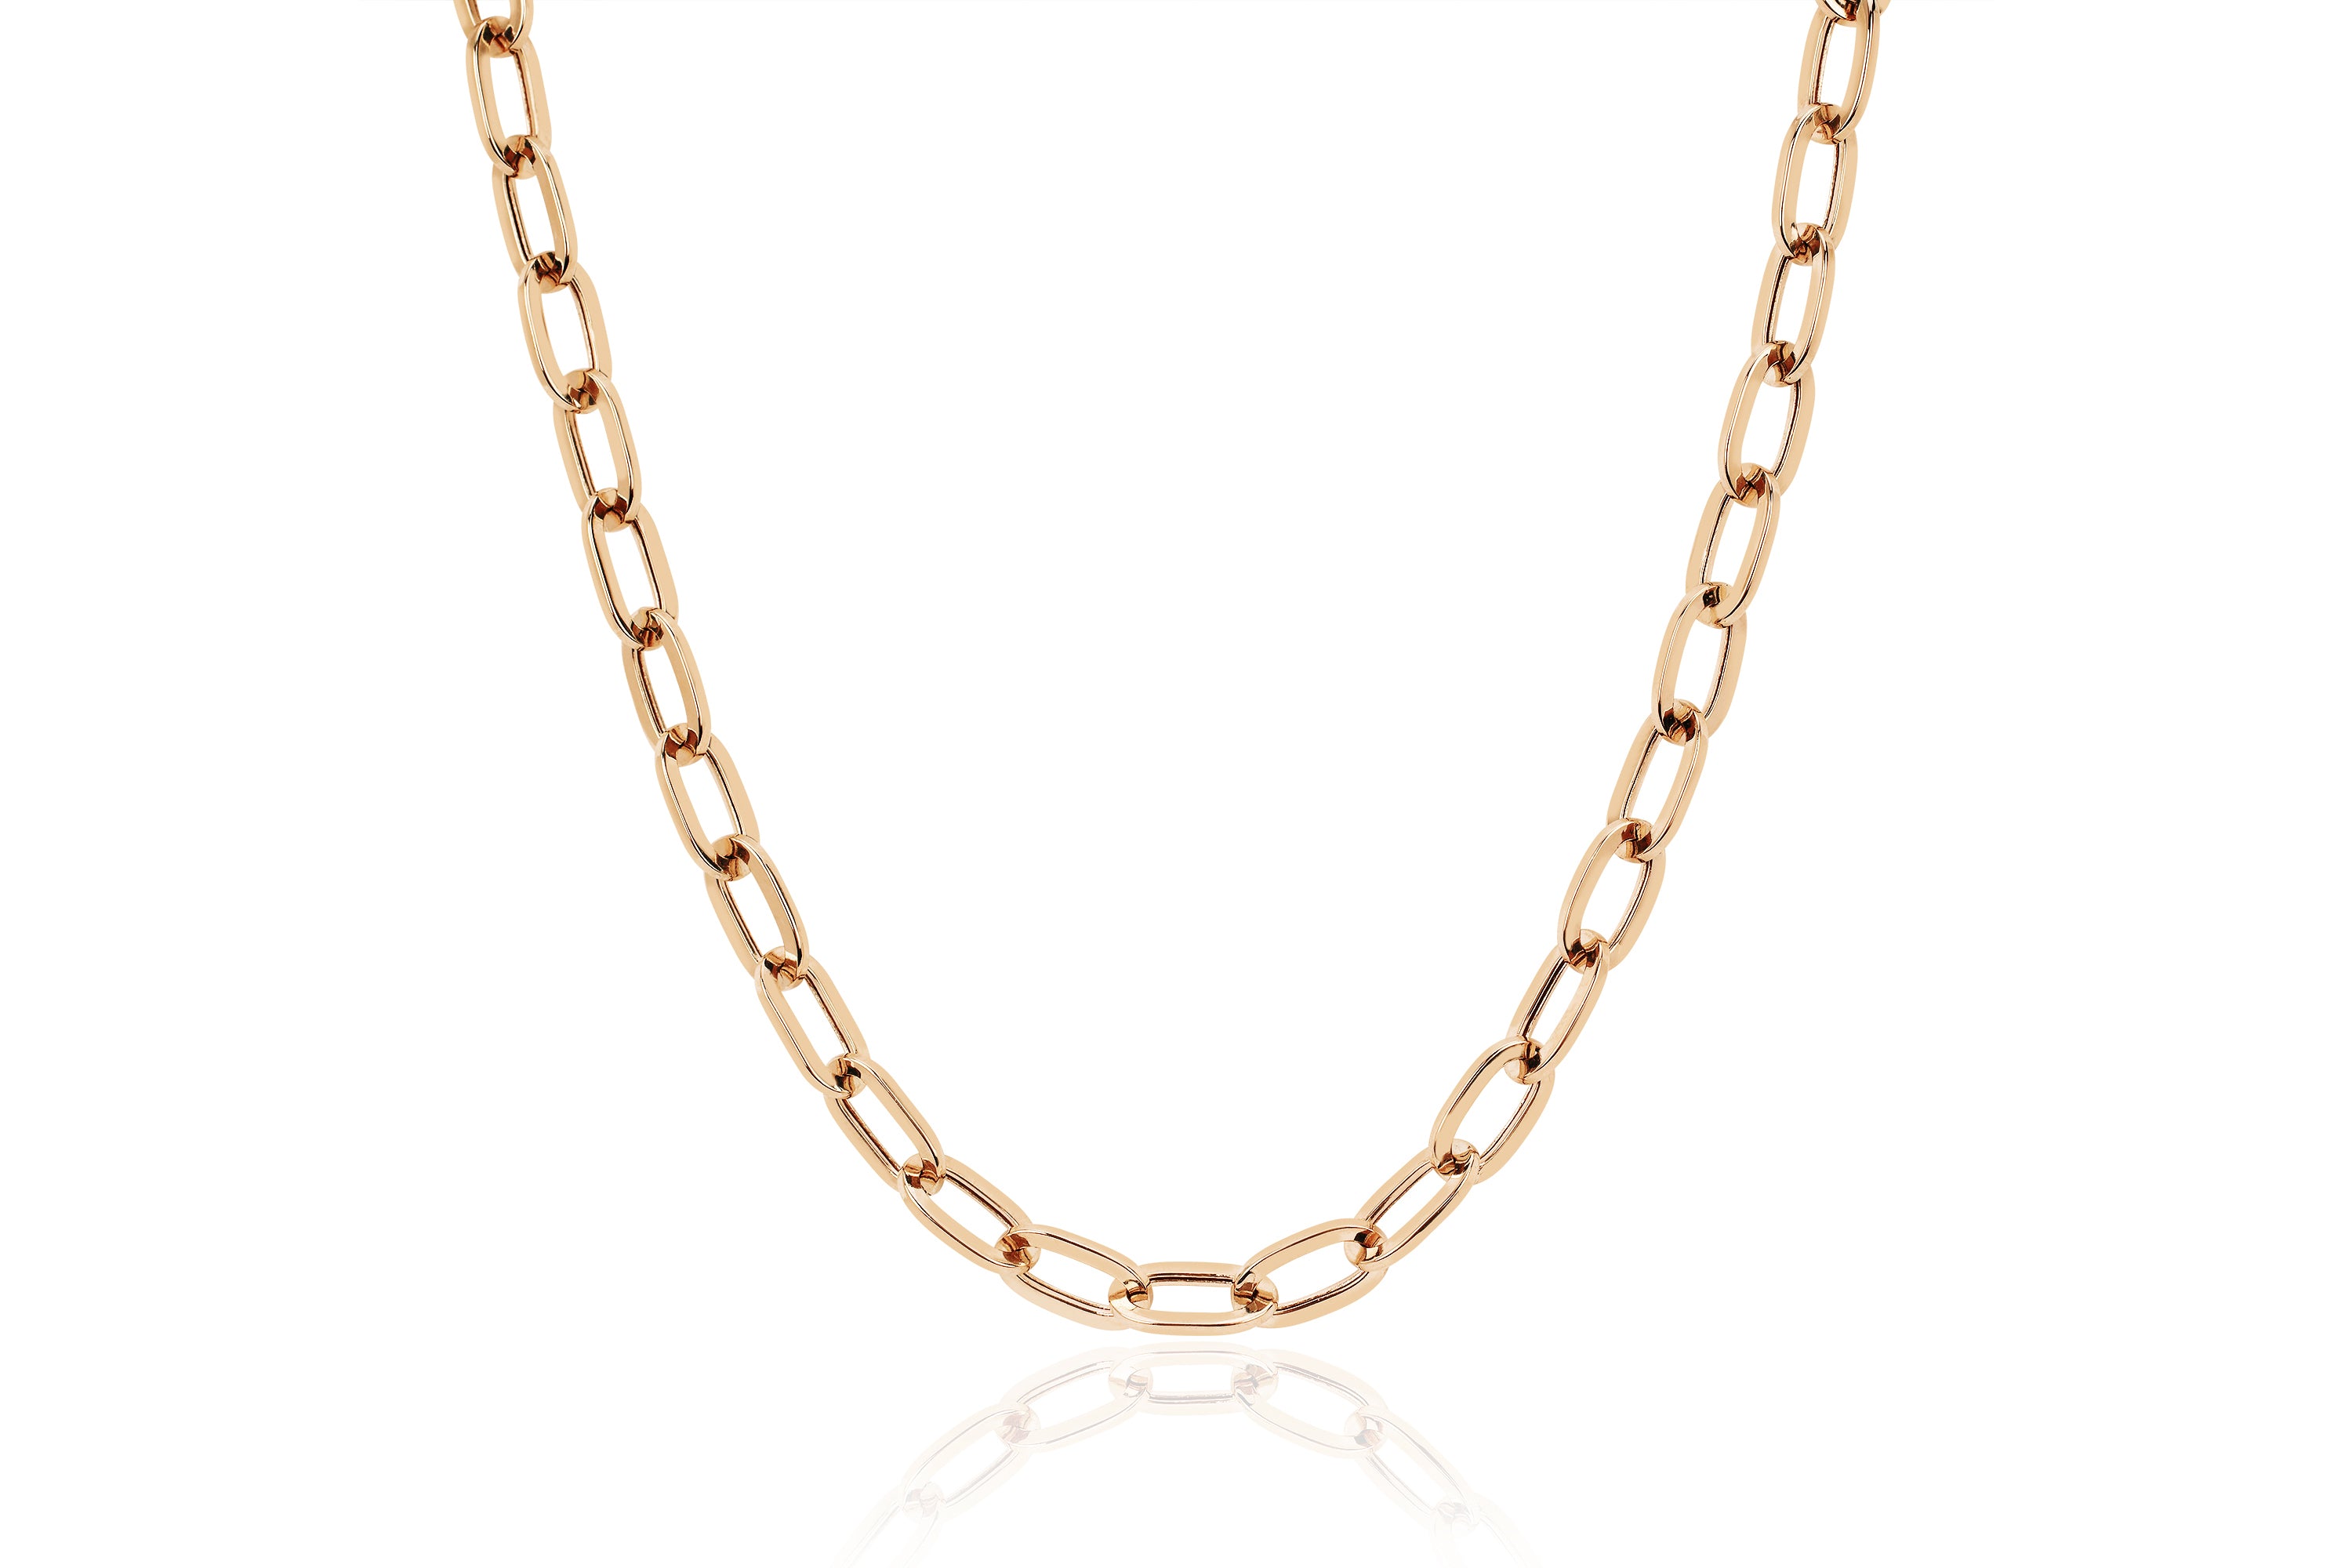 Jumbo Link Chain Necklace in rose gold